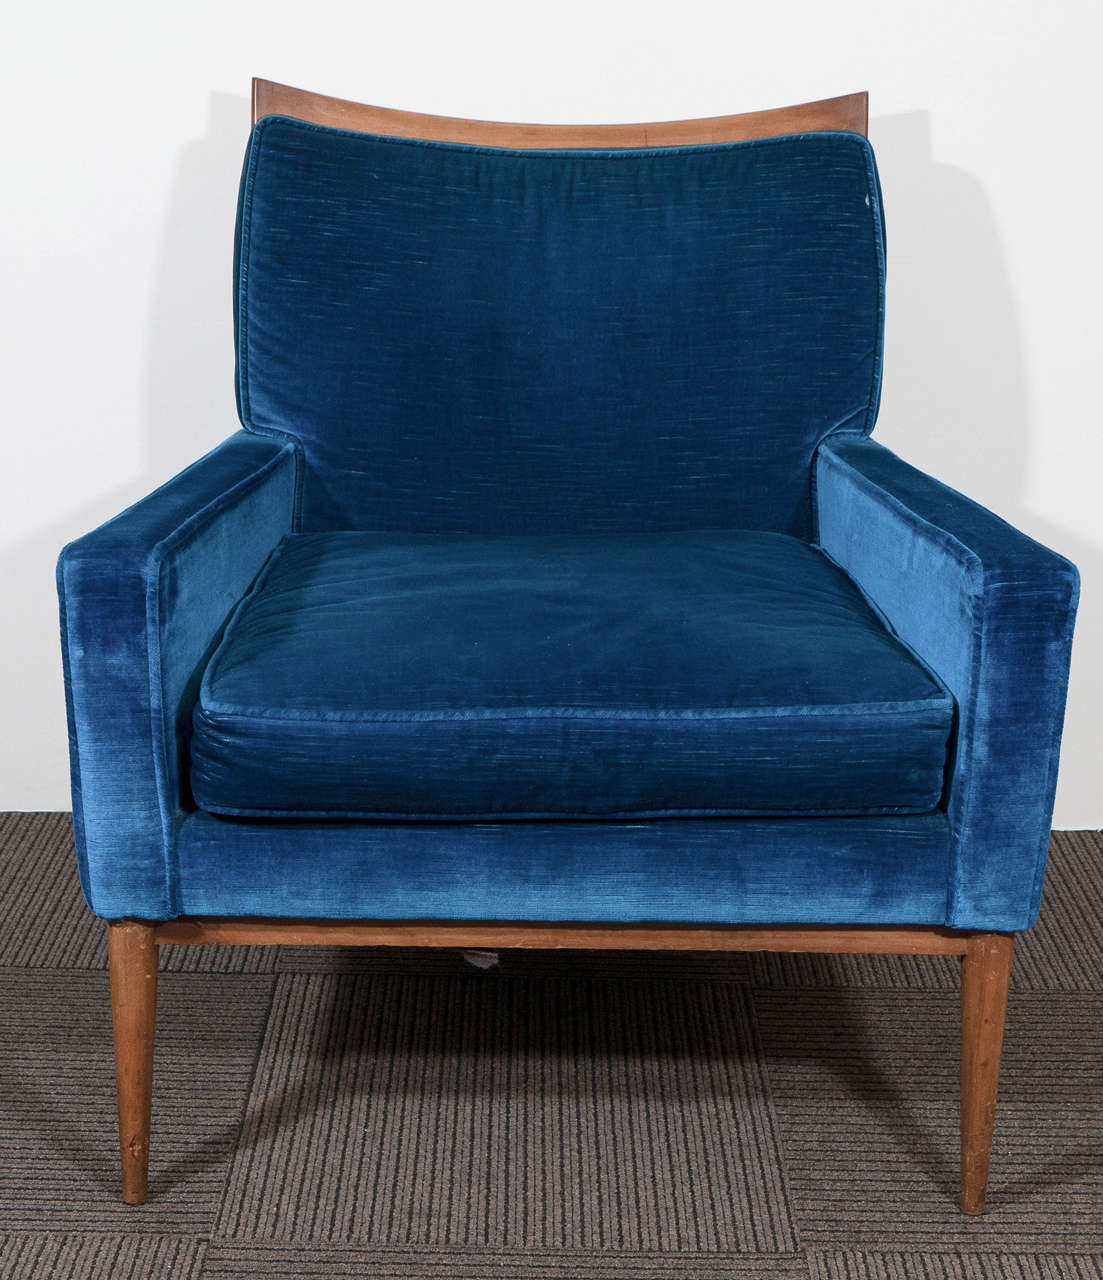 A pair of vintage modernistic armchairs, produced circa 1950s by designer Paul McCobb for Directional Furniture, upholstered in blue velvet against wood frame, on tapering legs. Good vintage condition, with some age appropriate wear, including minor